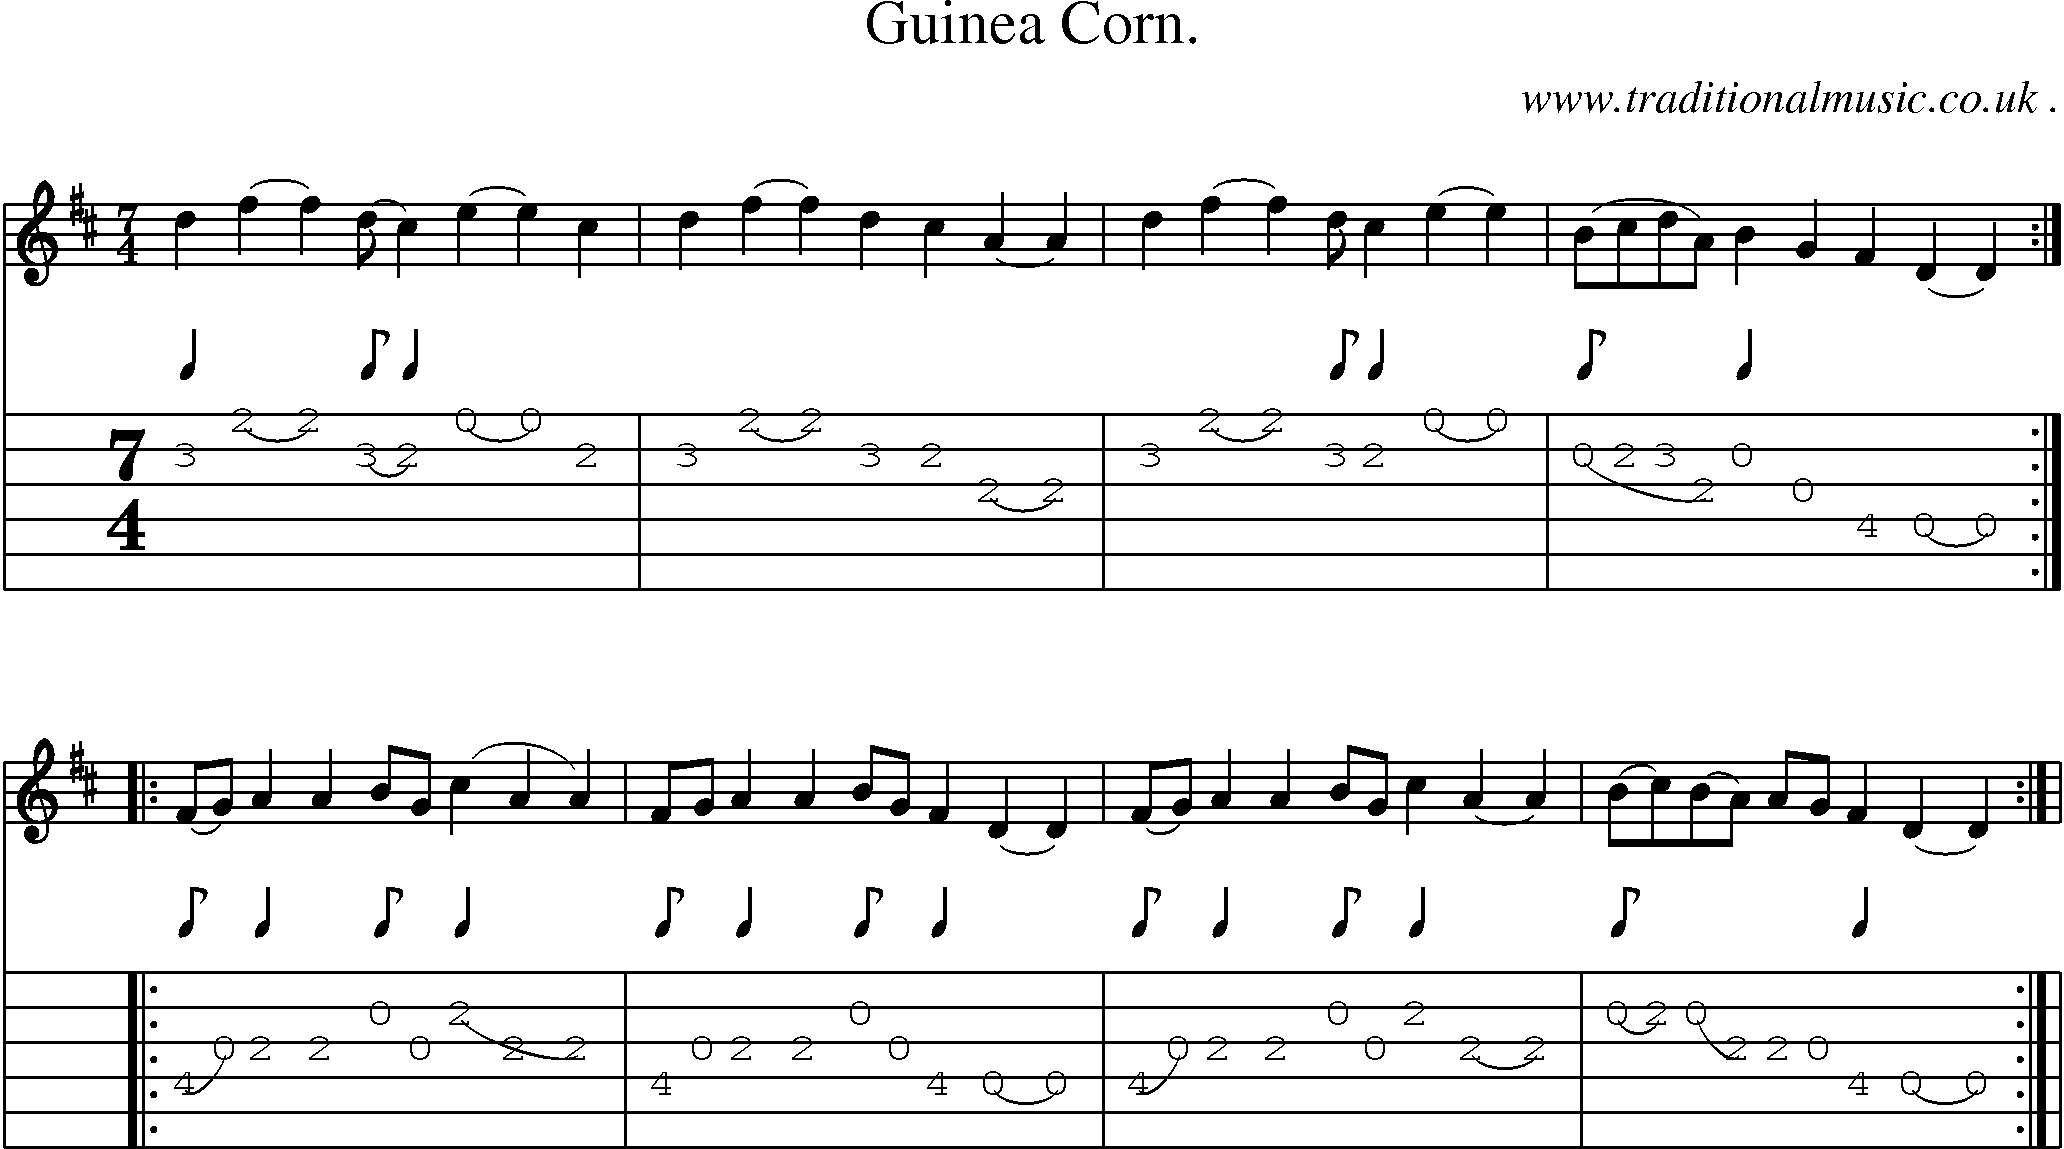 Sheet-Music and Guitar Tabs for Guinea Corn